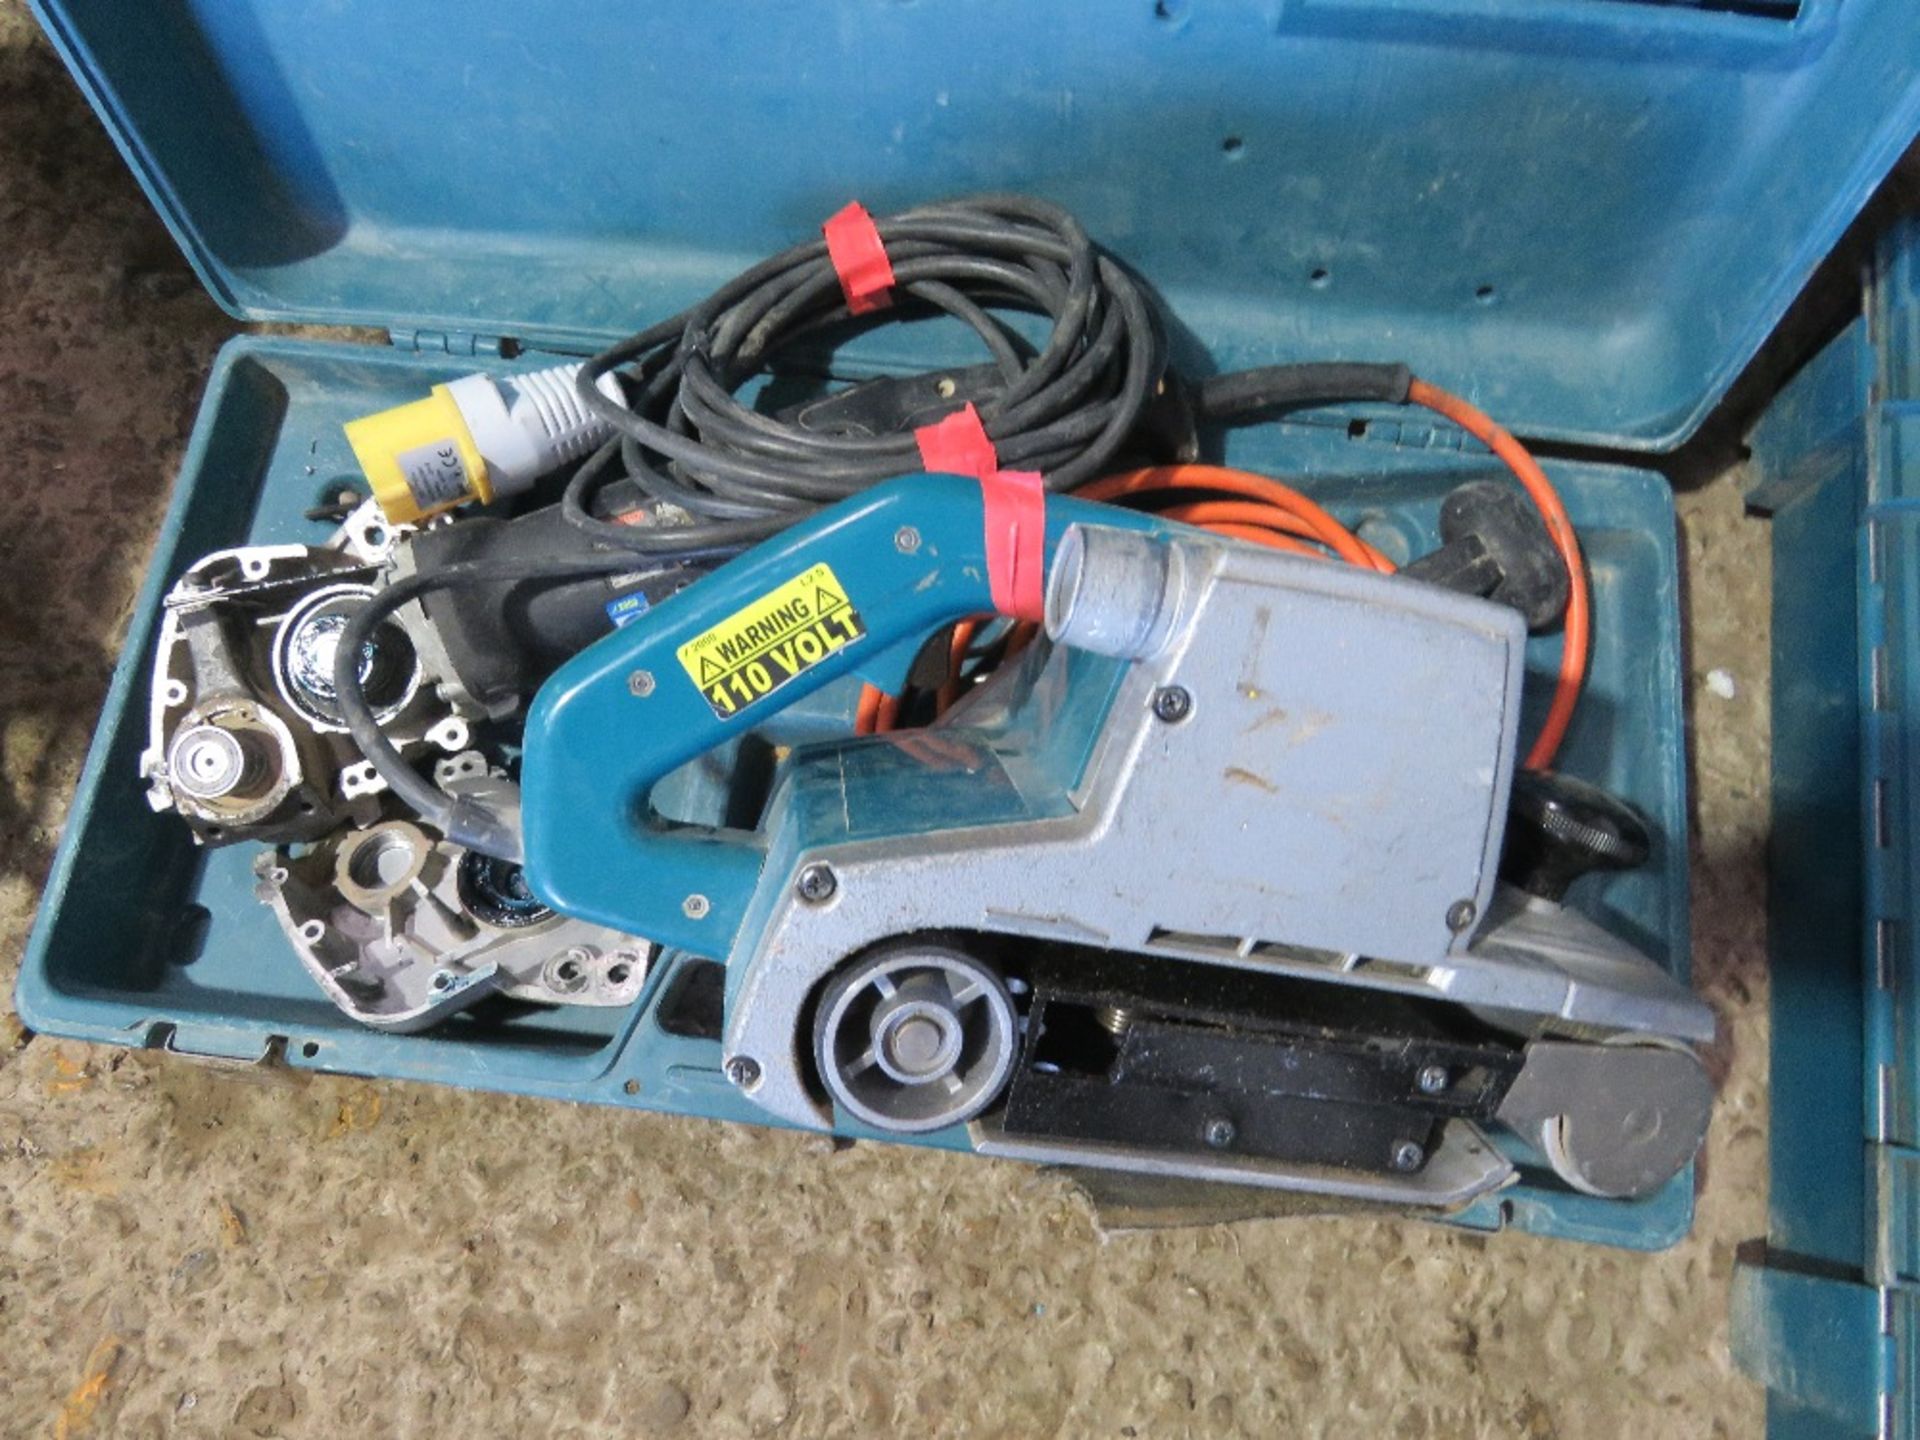 ARBORTECH SAW FOR SPARES OR REPAIR PLUS A BELT SANDER. - Image 4 of 4